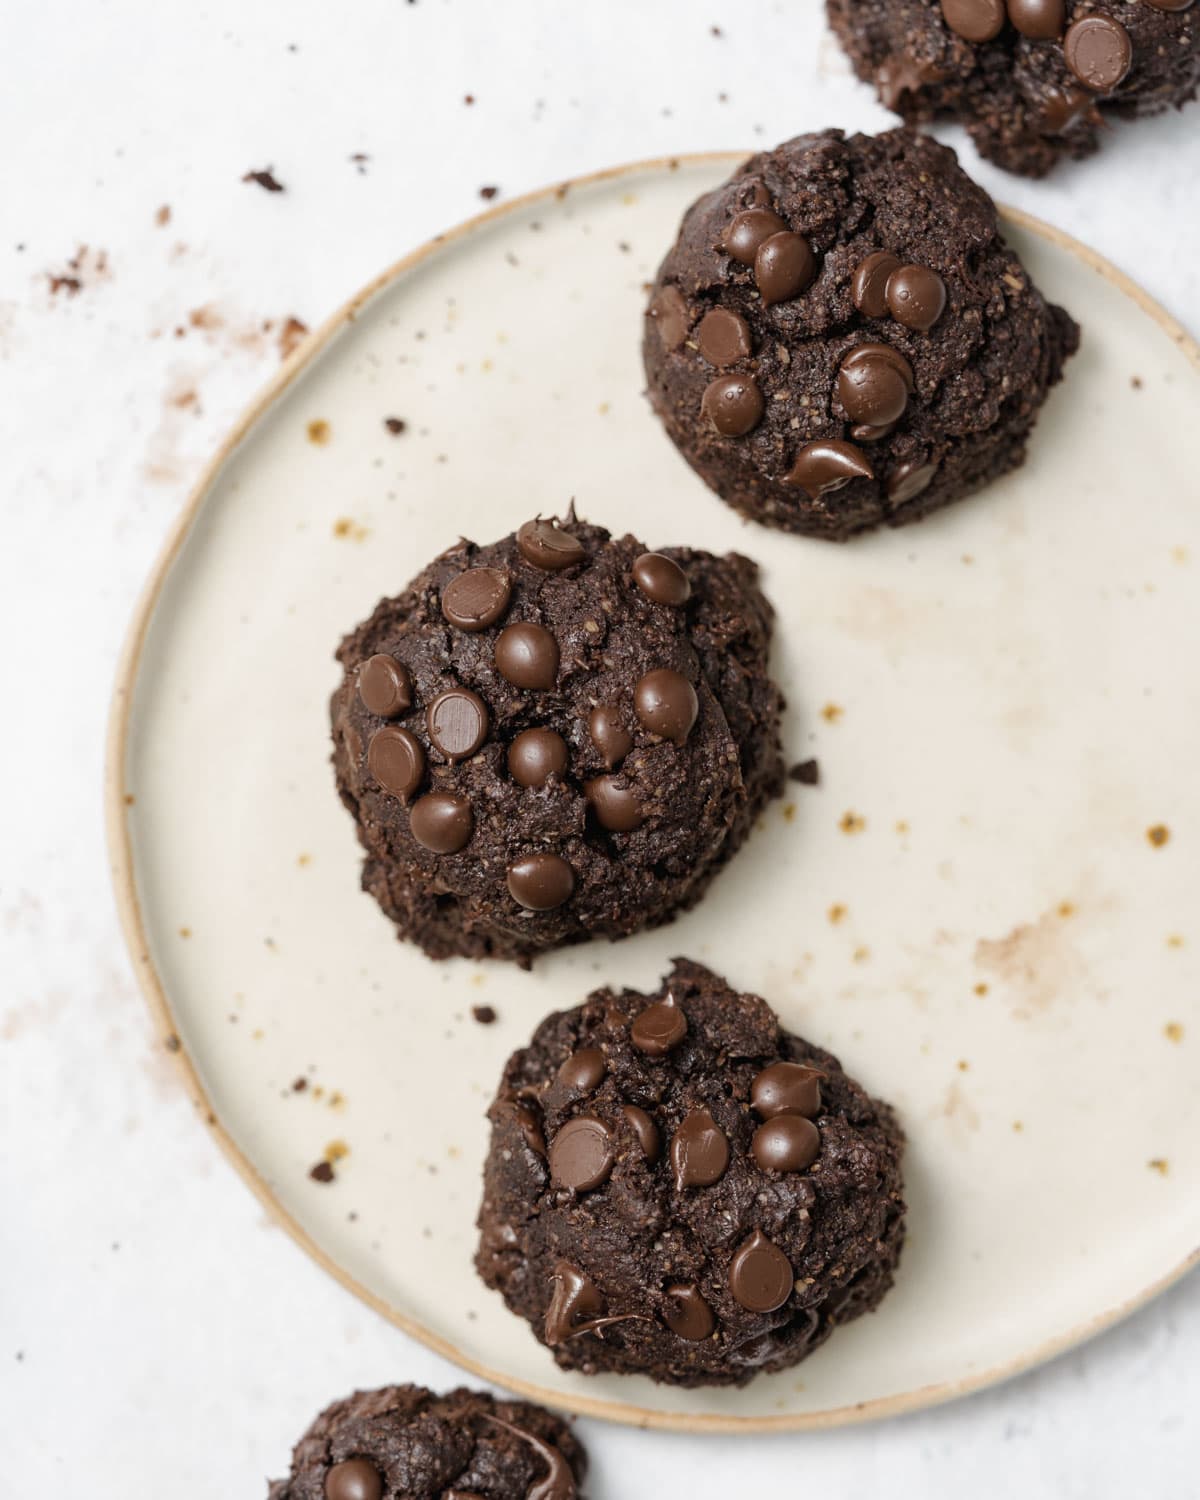 Chocolate cookies with chocolate chips on a white plate.